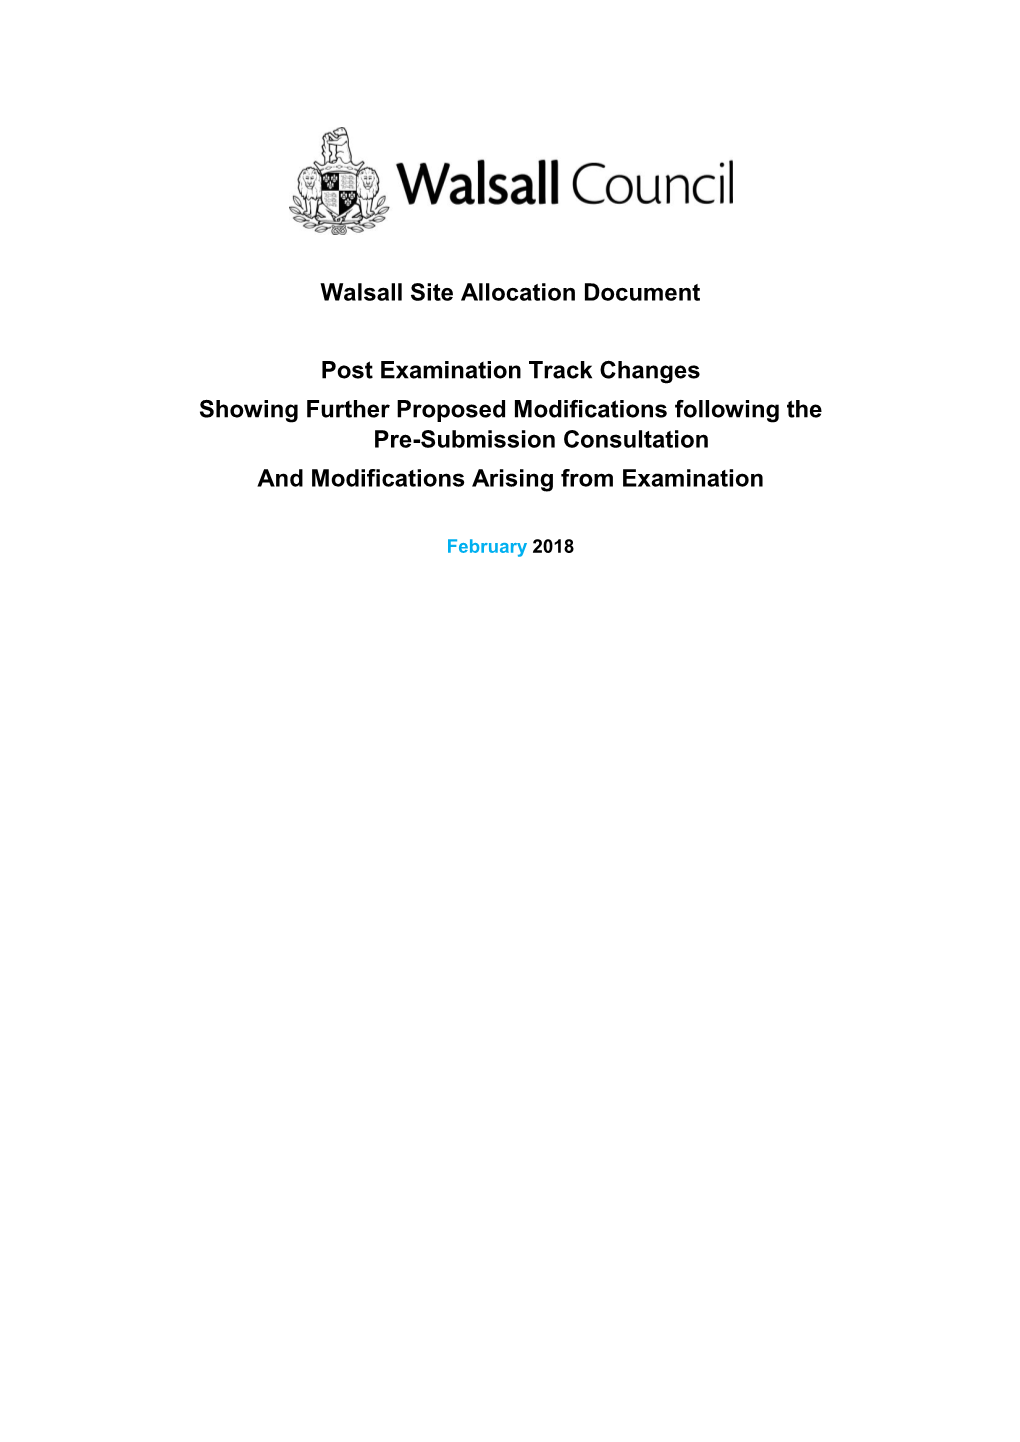 Walsall Site Allocation Document Post Examination Track Changes